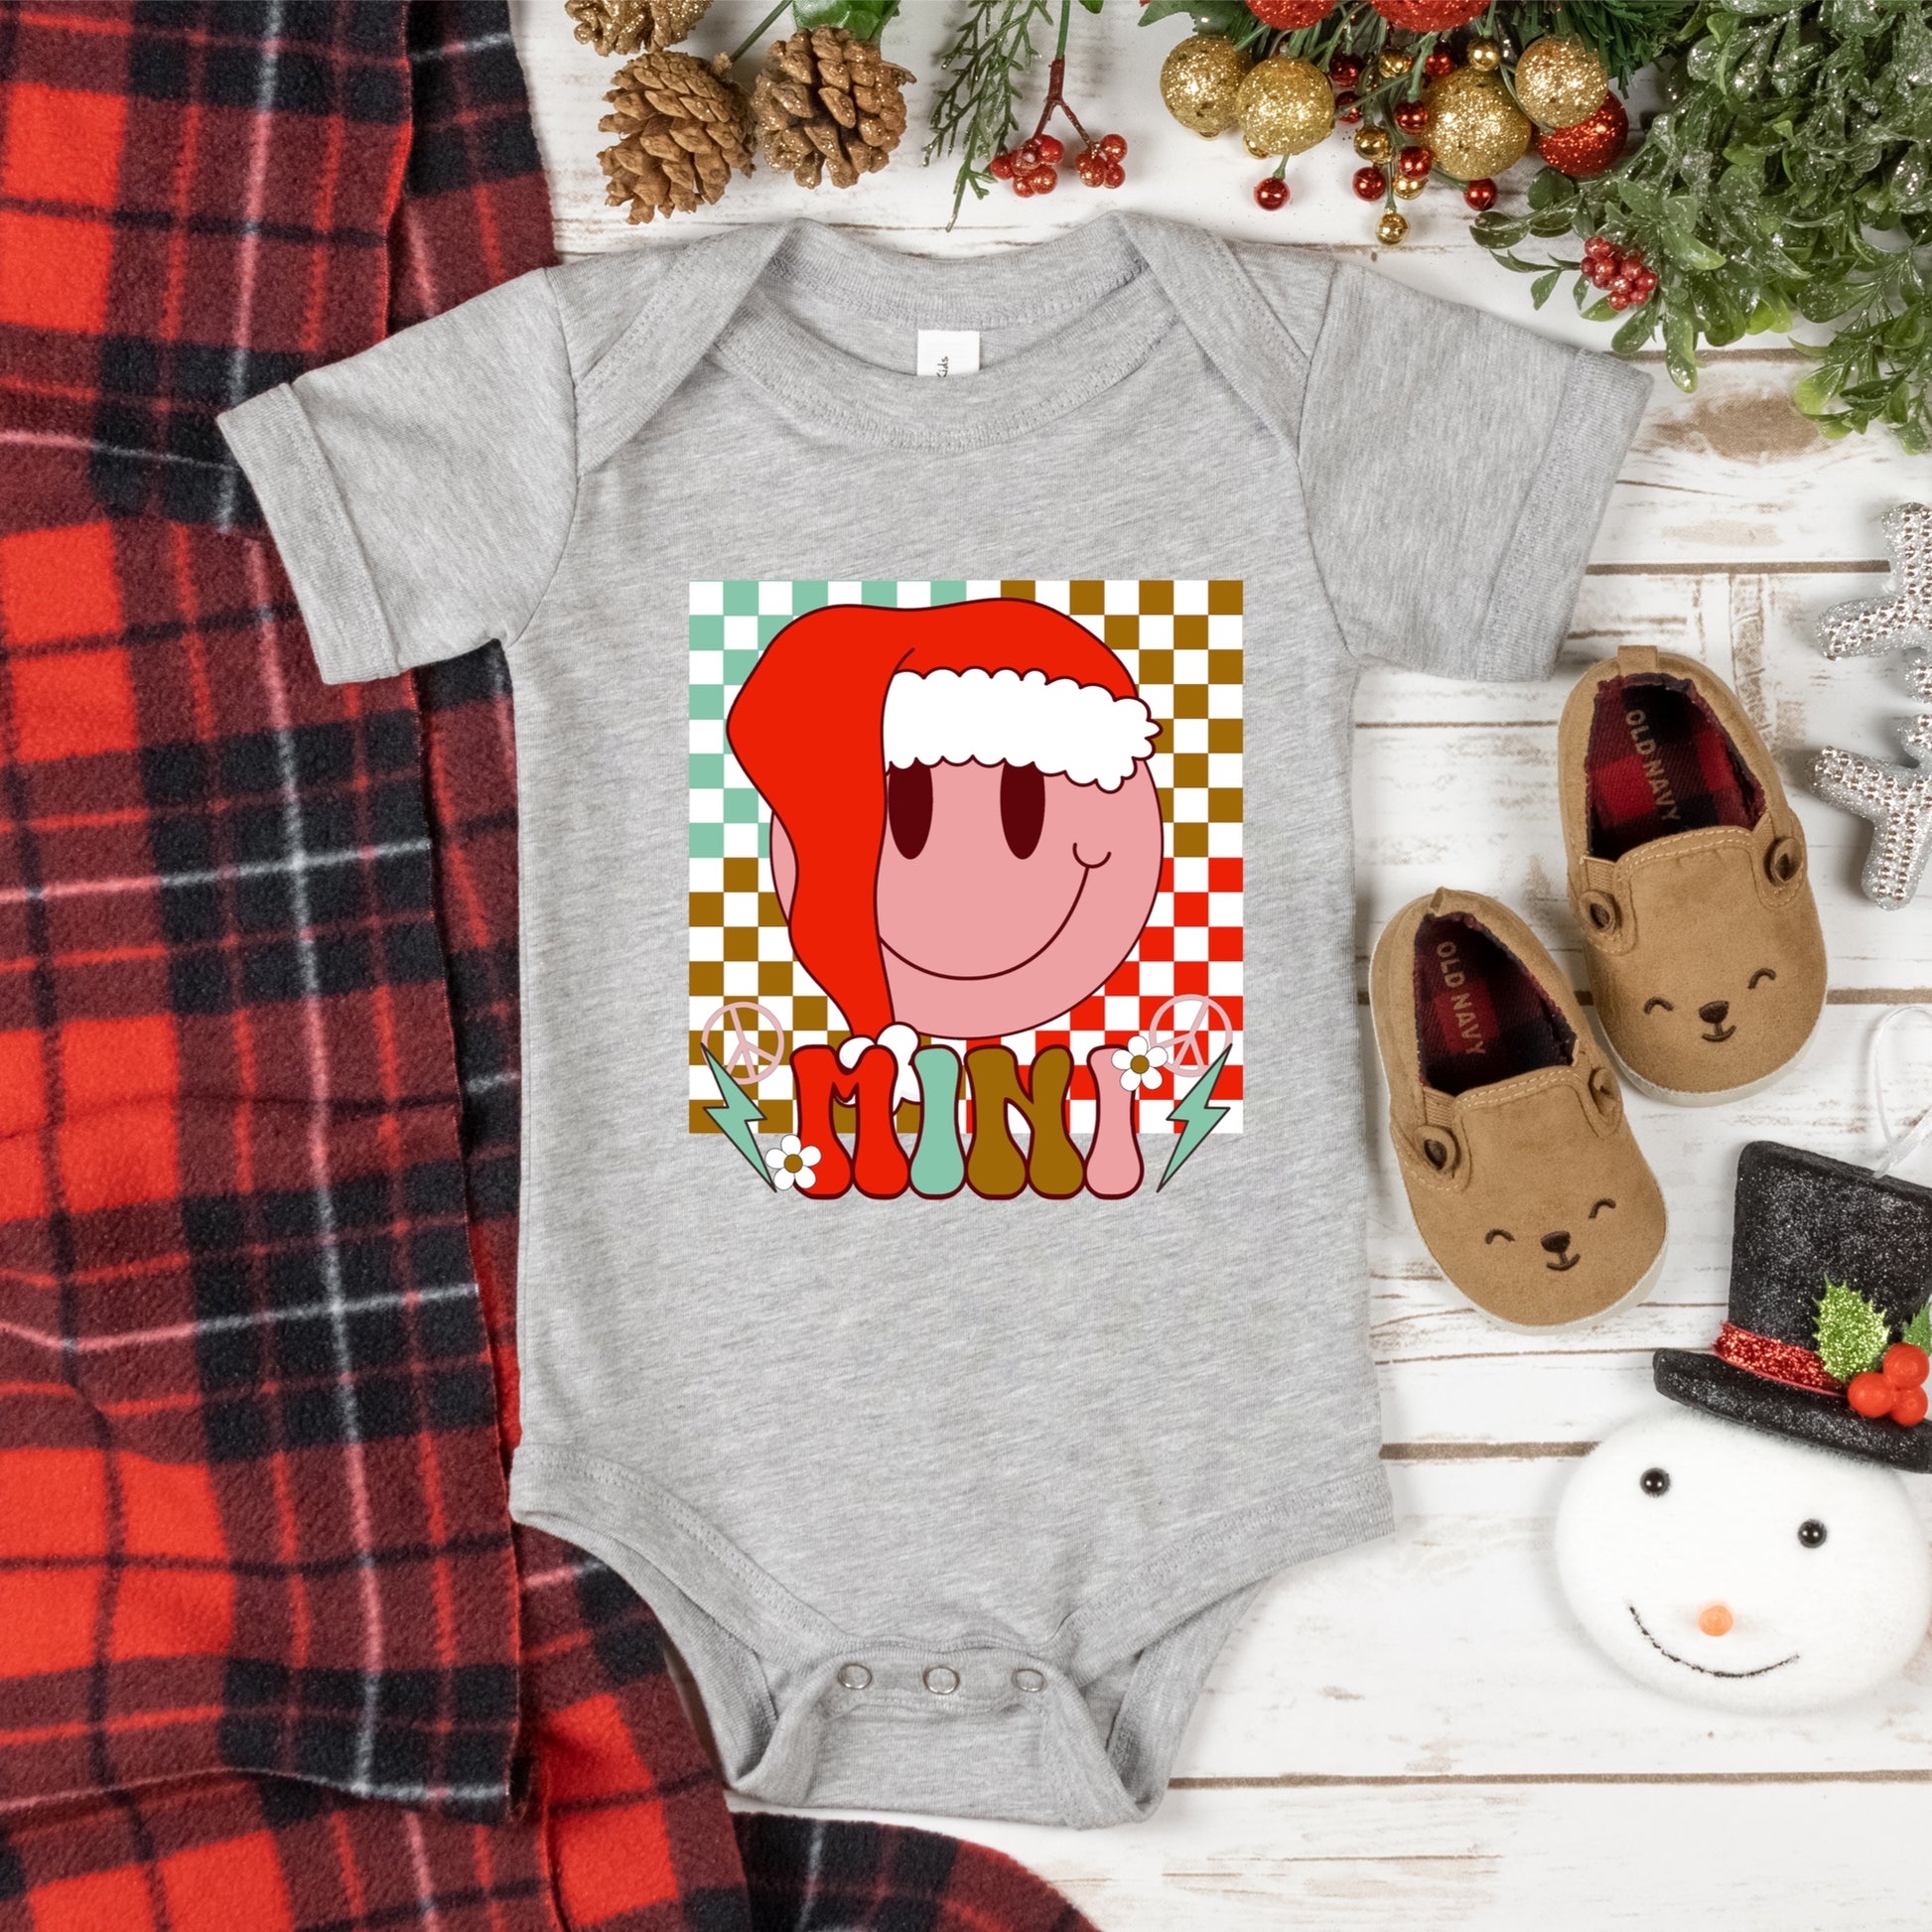 Christmas DTF and Sublimation that says "Mini"